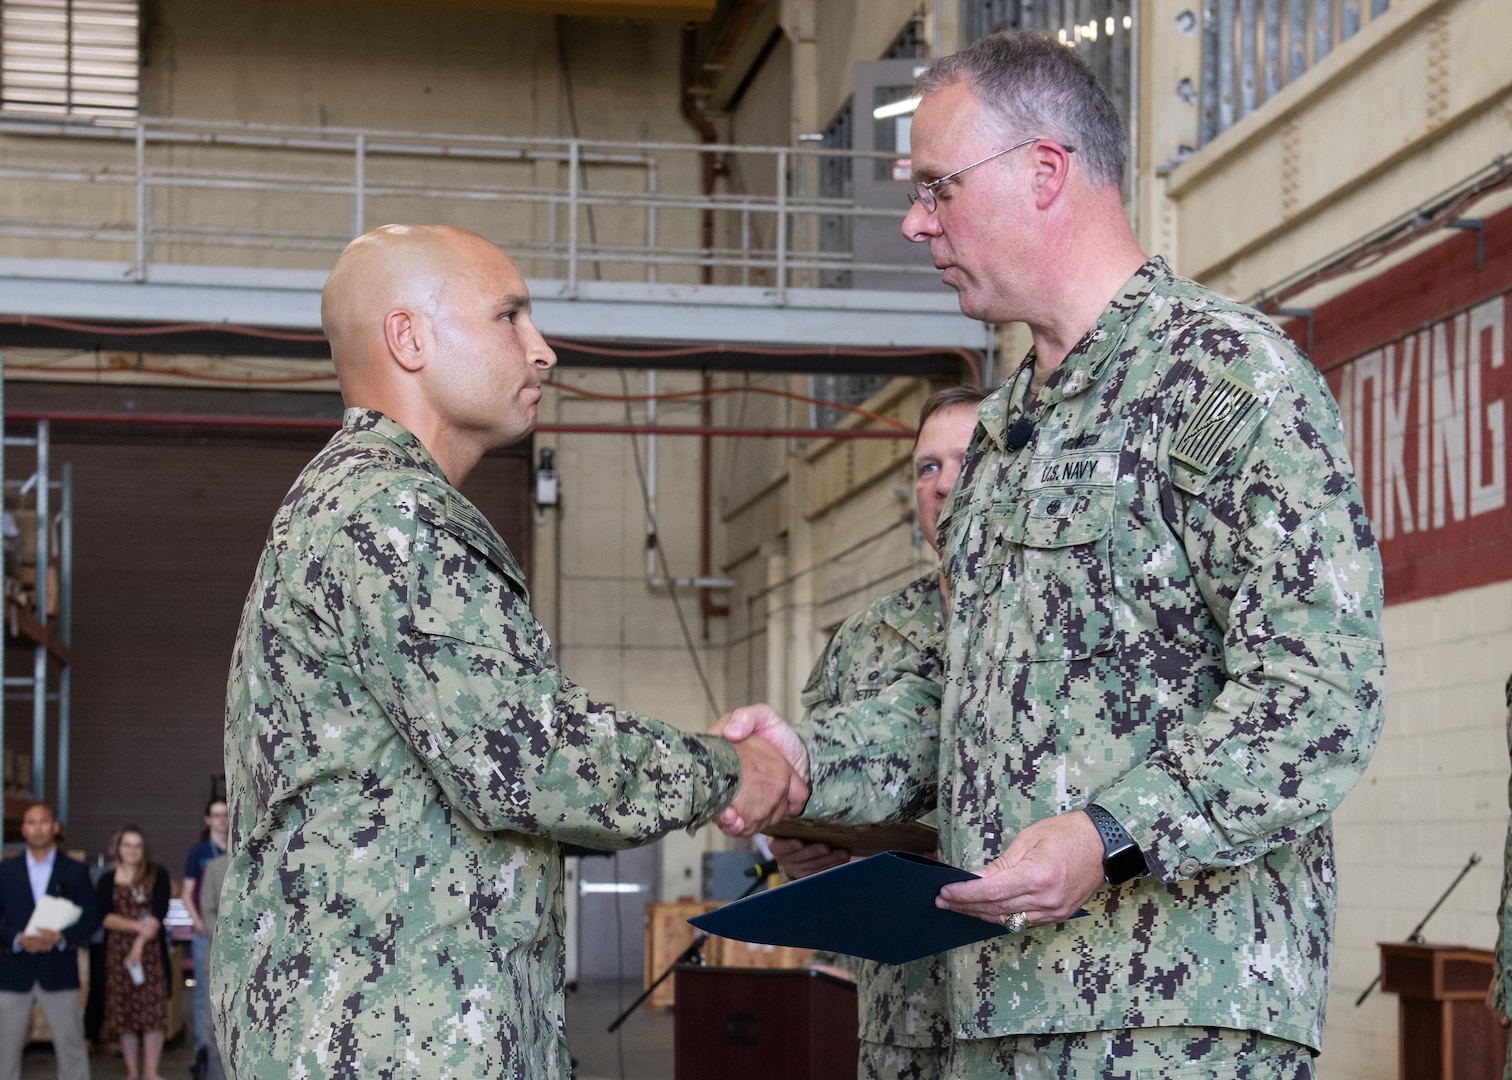 Commander, Naval Sea Systems Command Warfare Centers Rear Adm. Eric Ver Hage, presents Petty Officer 1st Class Joseph Rodriguez, Naval Surface Warfare Center Panama City Division (NSWC PCD) dive locker leading petty officer and diving supervisor, letter of commendation for Sailor of the Quarter during an All Hands at NSWC PCD May 1.